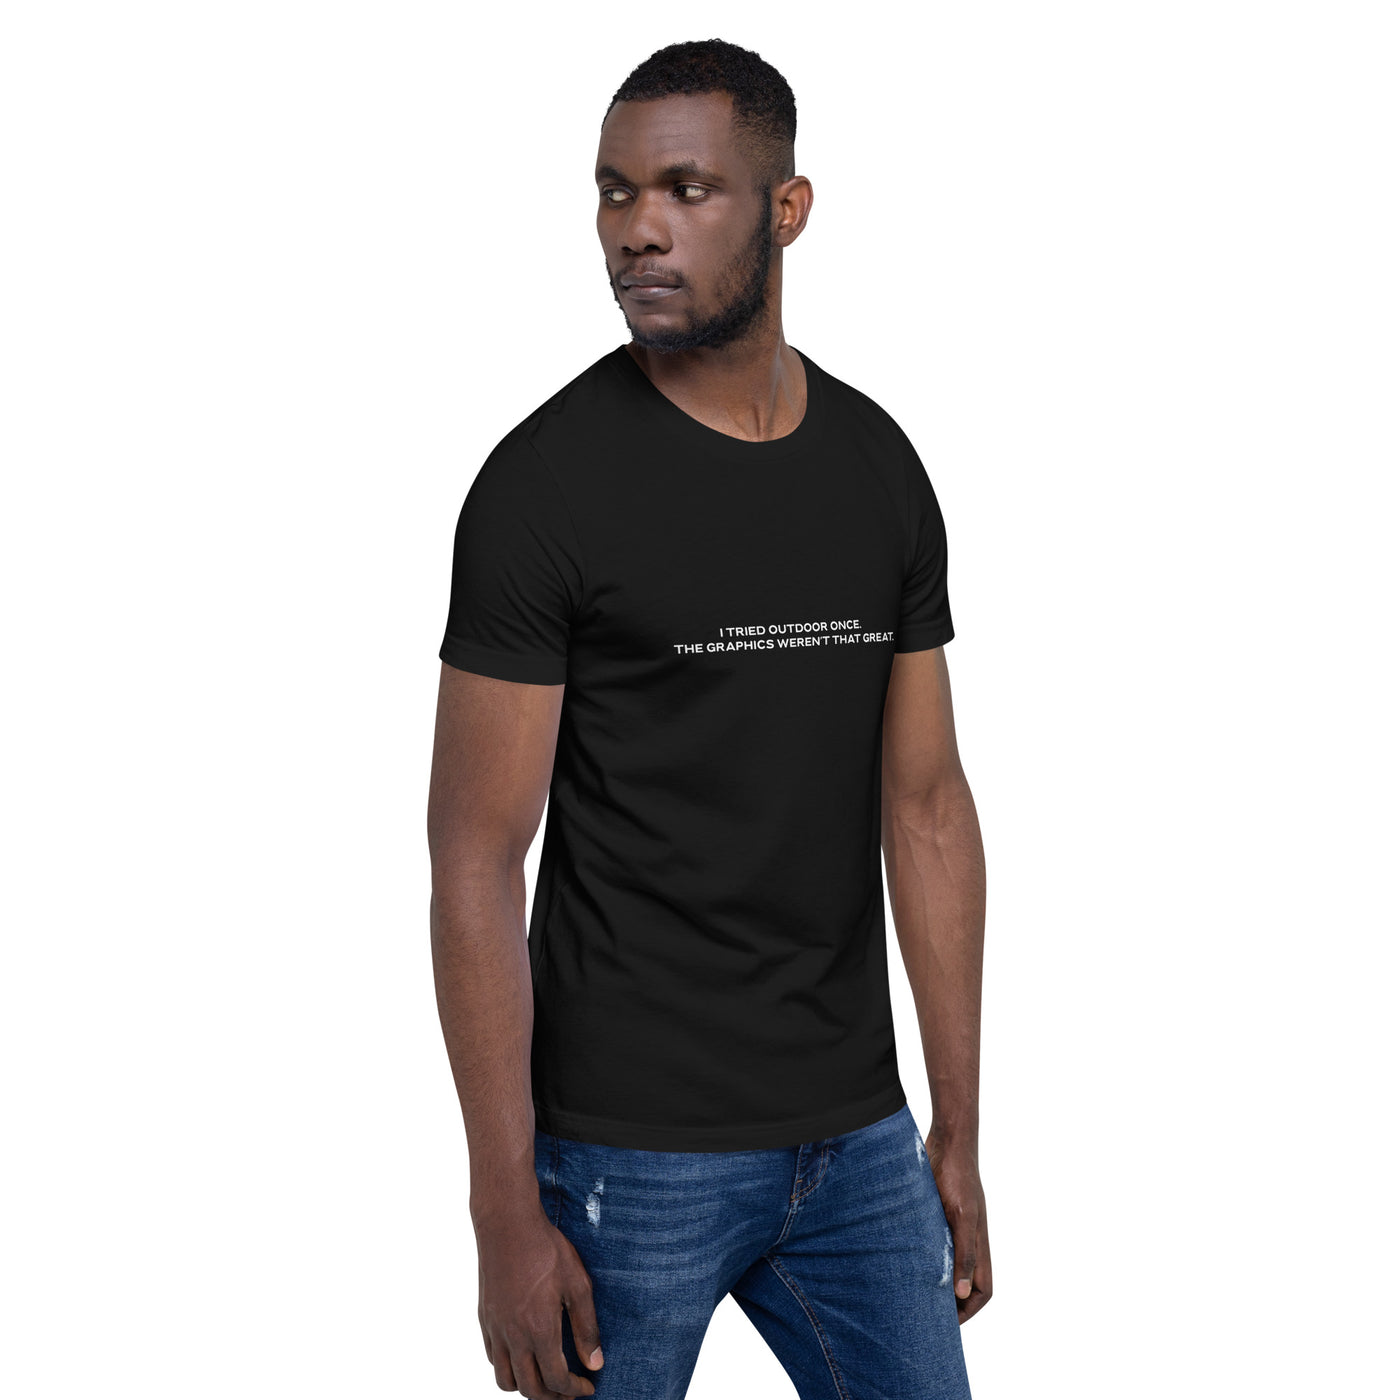 I Tried outdoor once, but the Graphics Weren't that good V1 - Unisex t-shirt